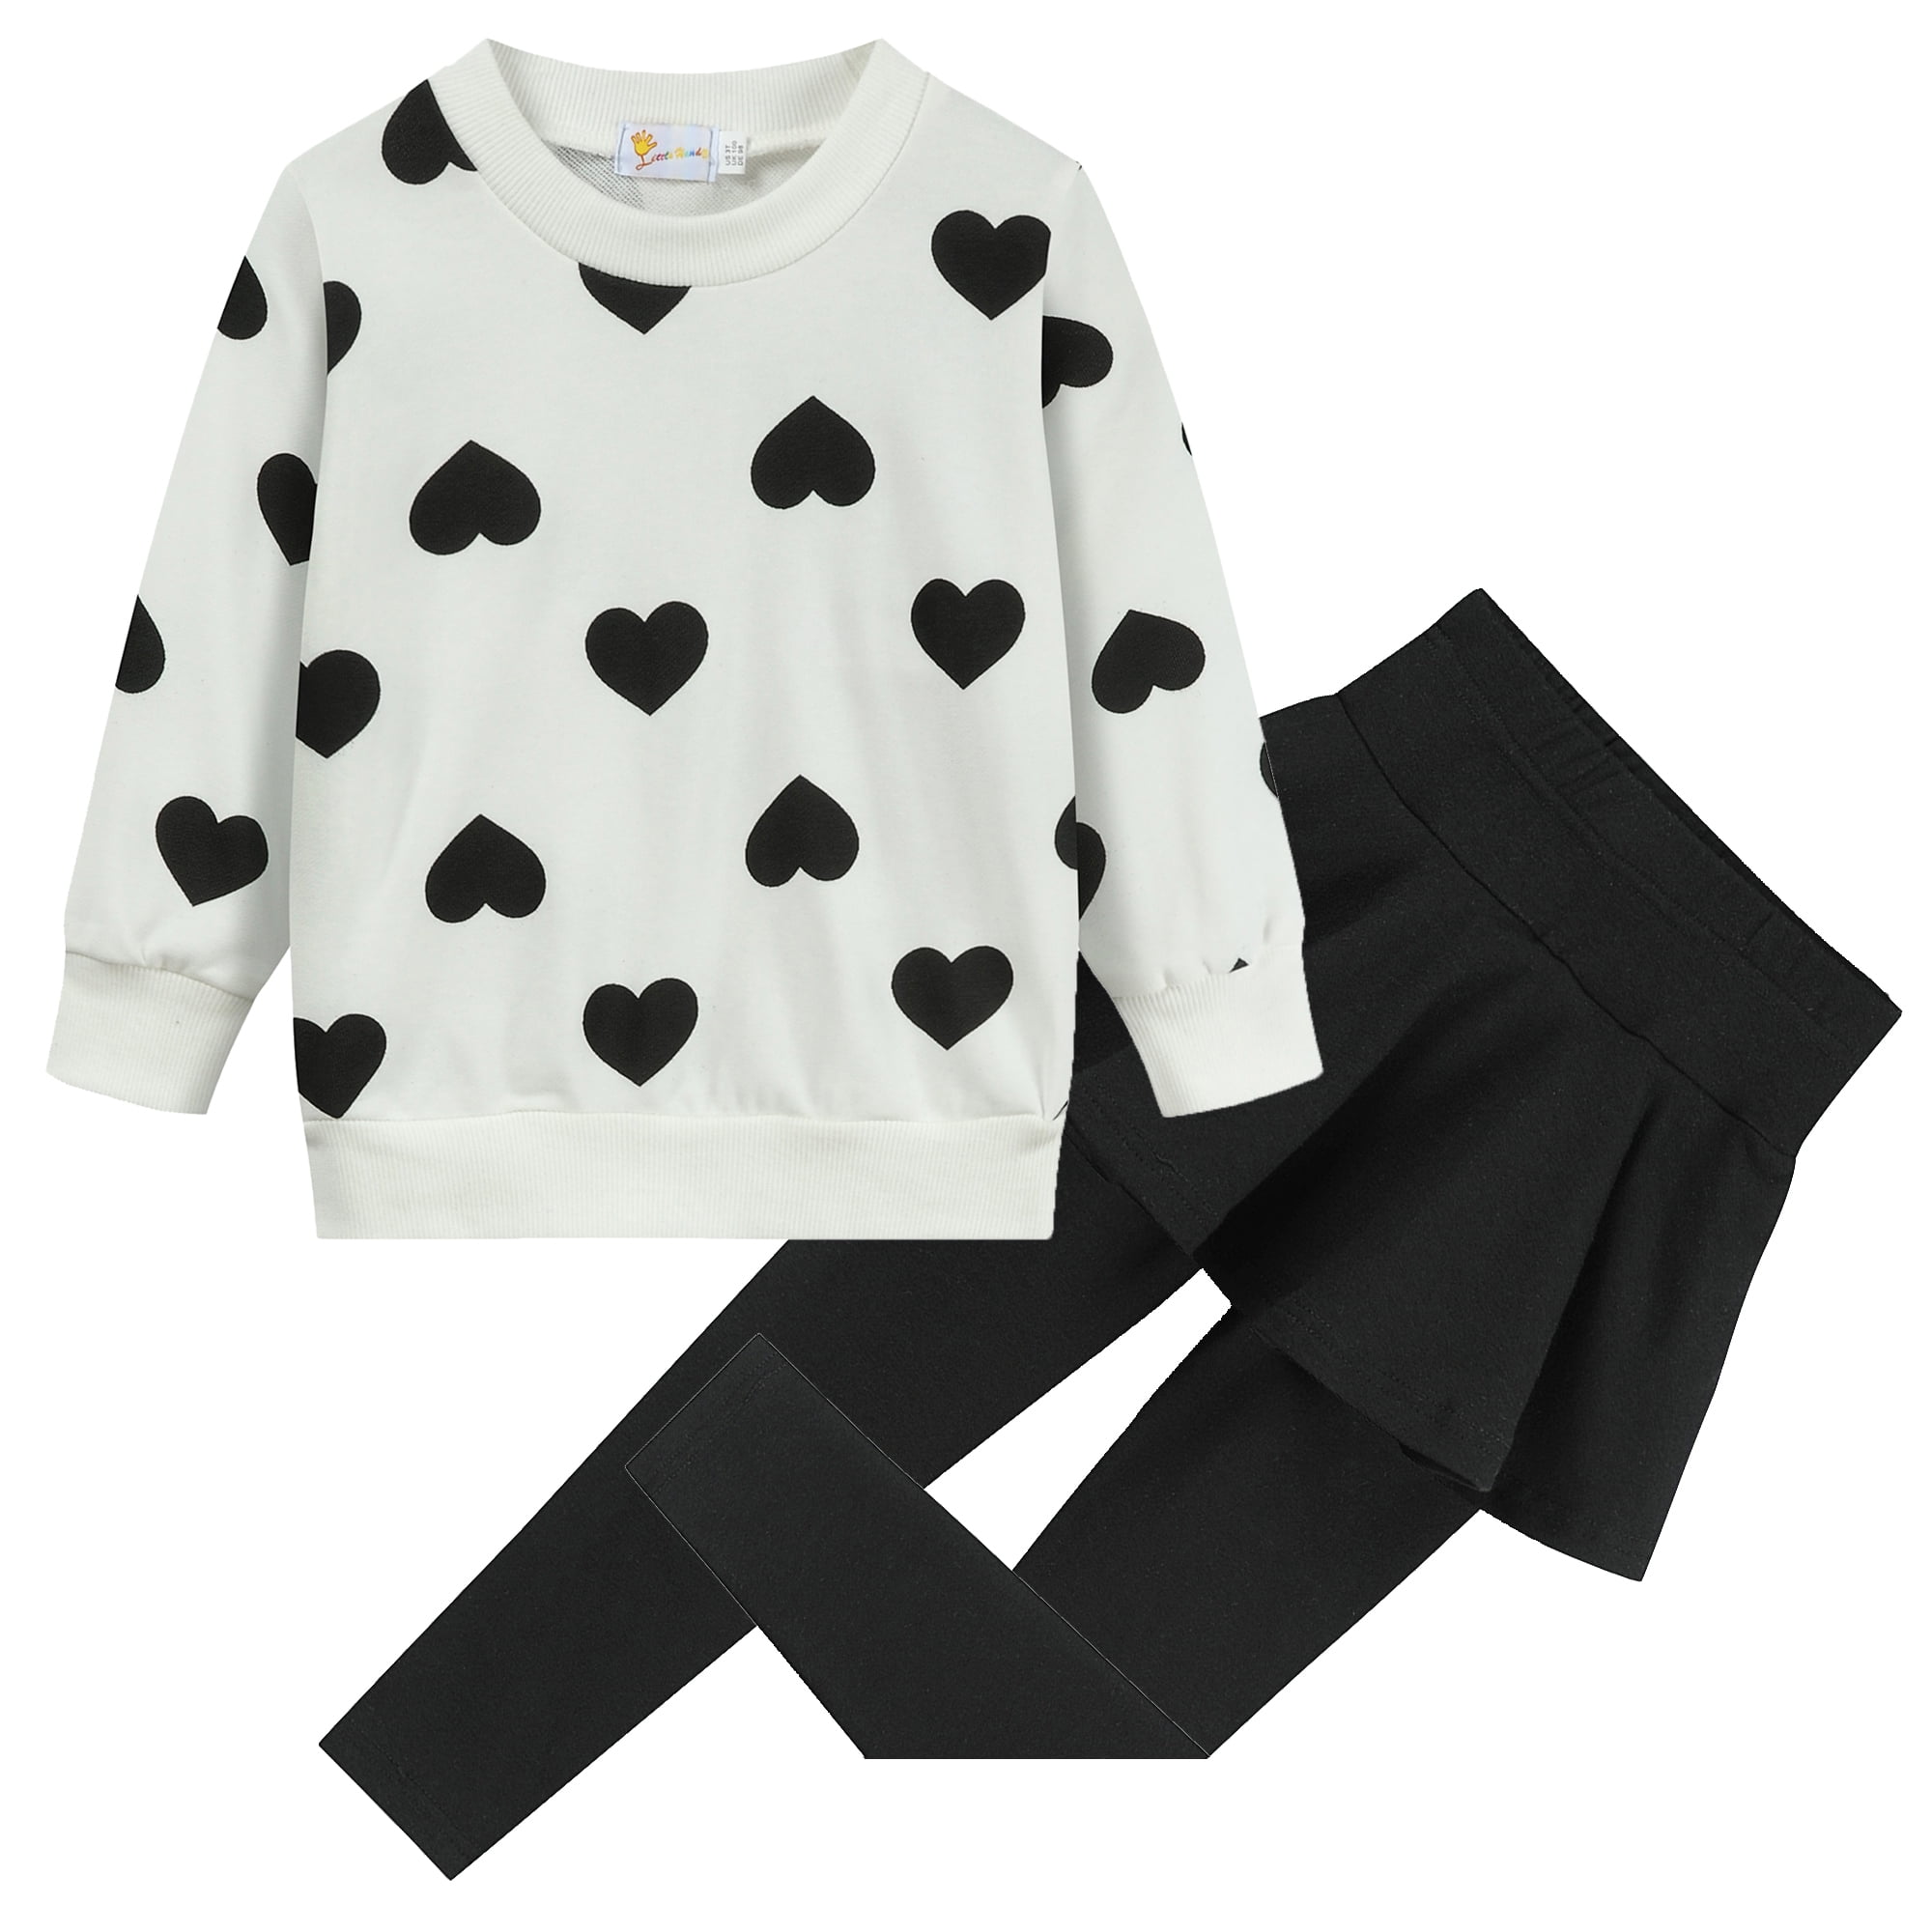 Little Hand Girl Clothing Set Outfit Sets Sweatshirt Top & Long